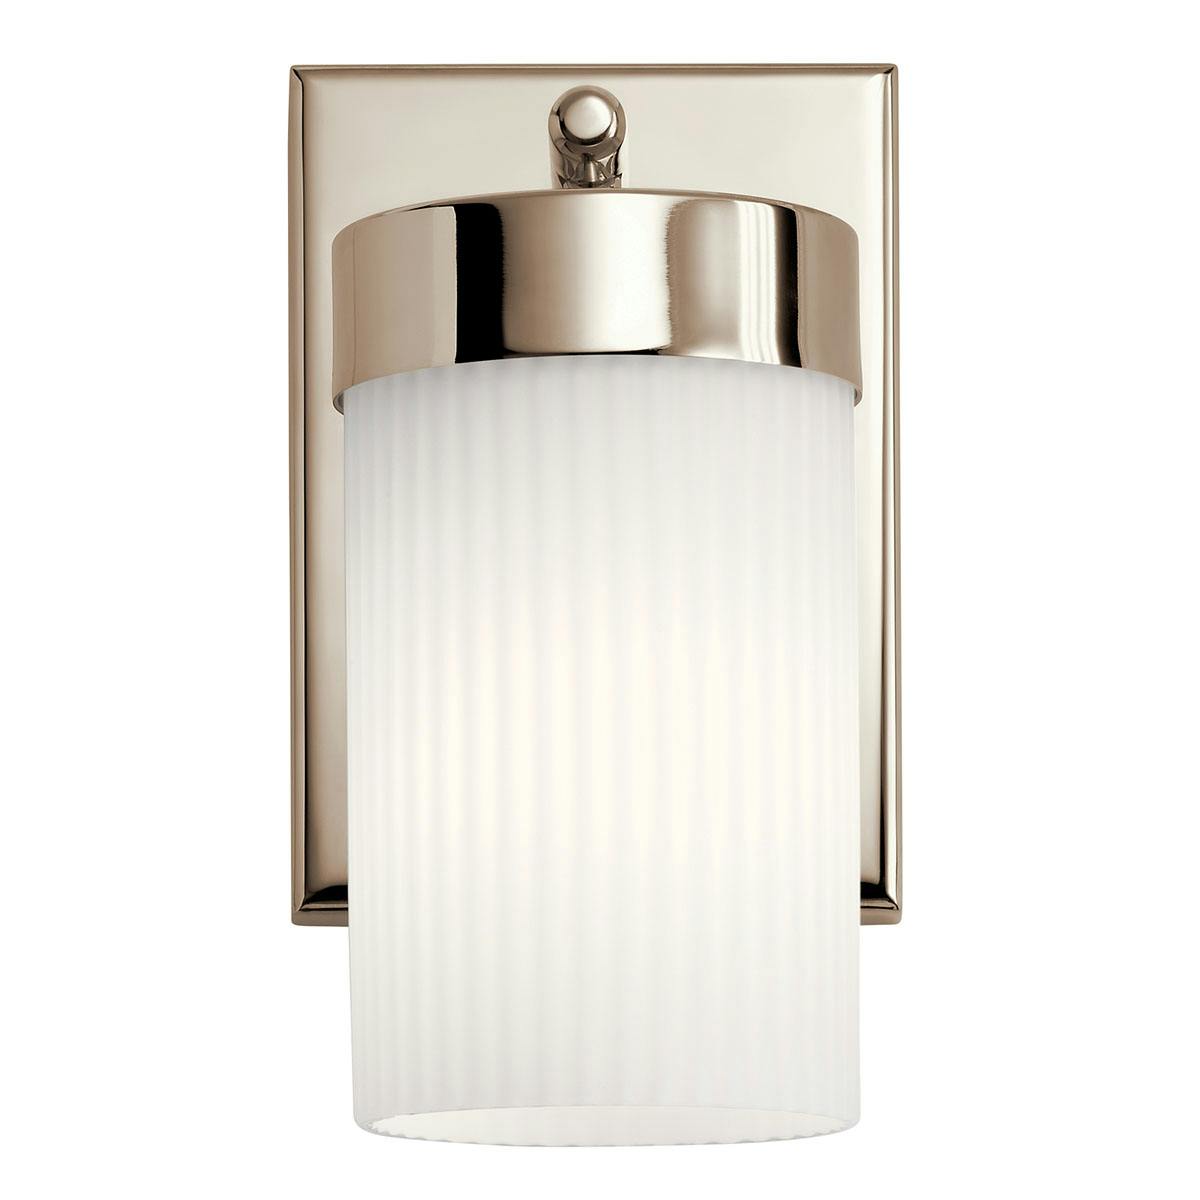 Front view of the Ciona 9" 1 Light Sconce in Nickel on a white background